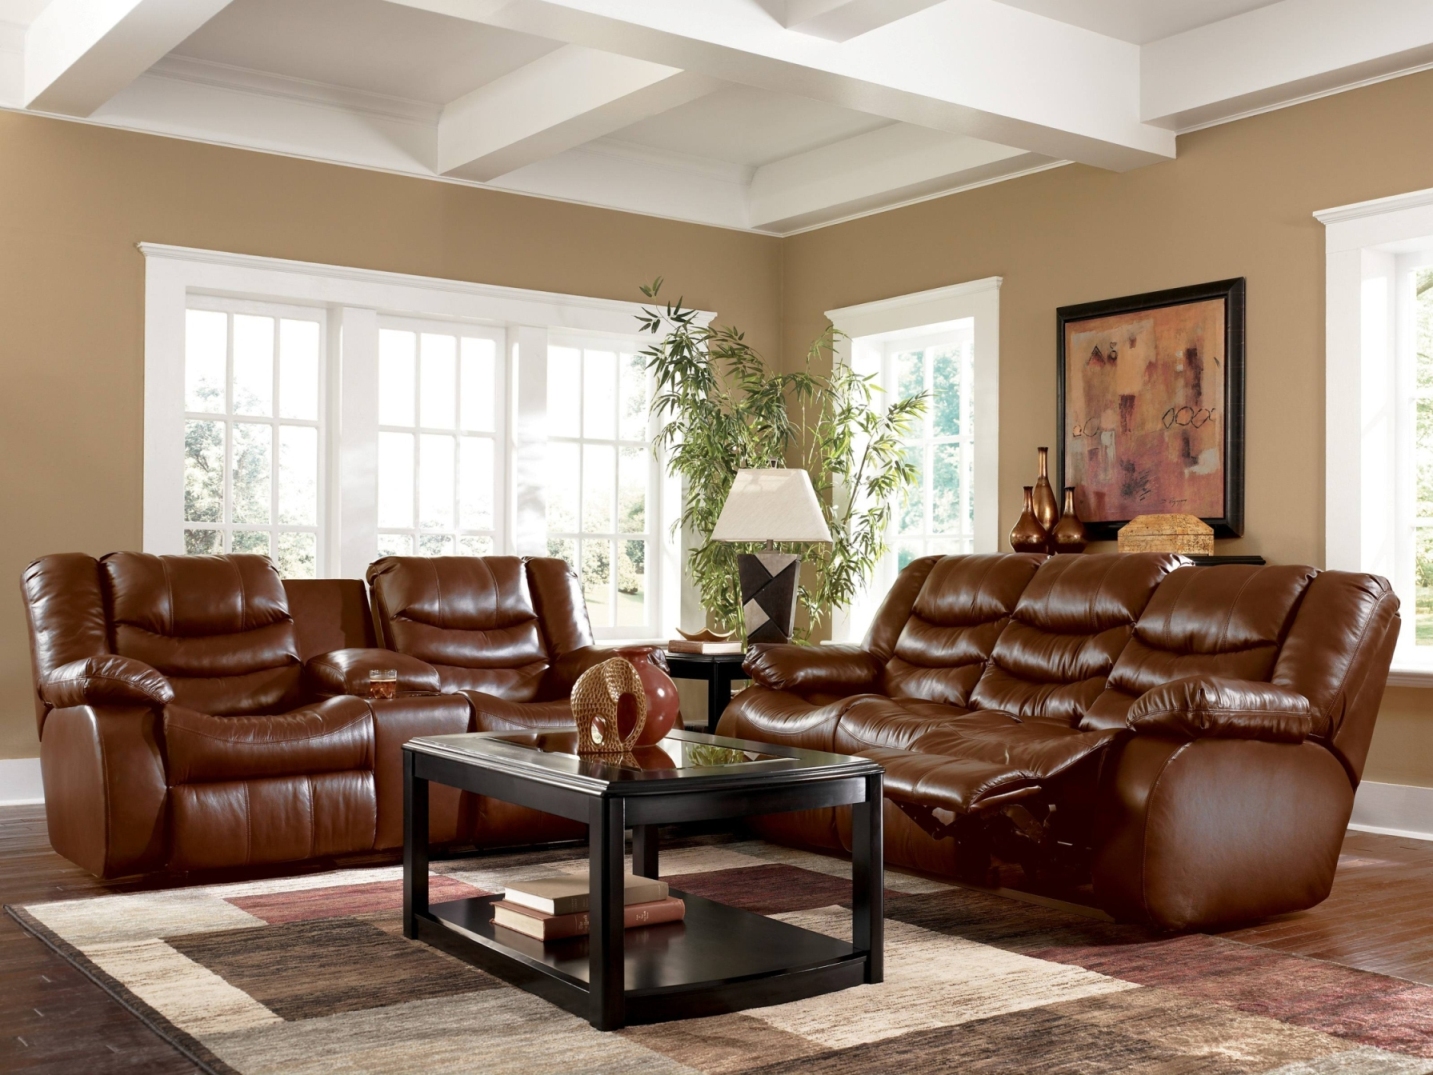 Painting Ideas For Living Room With Brown Furniture